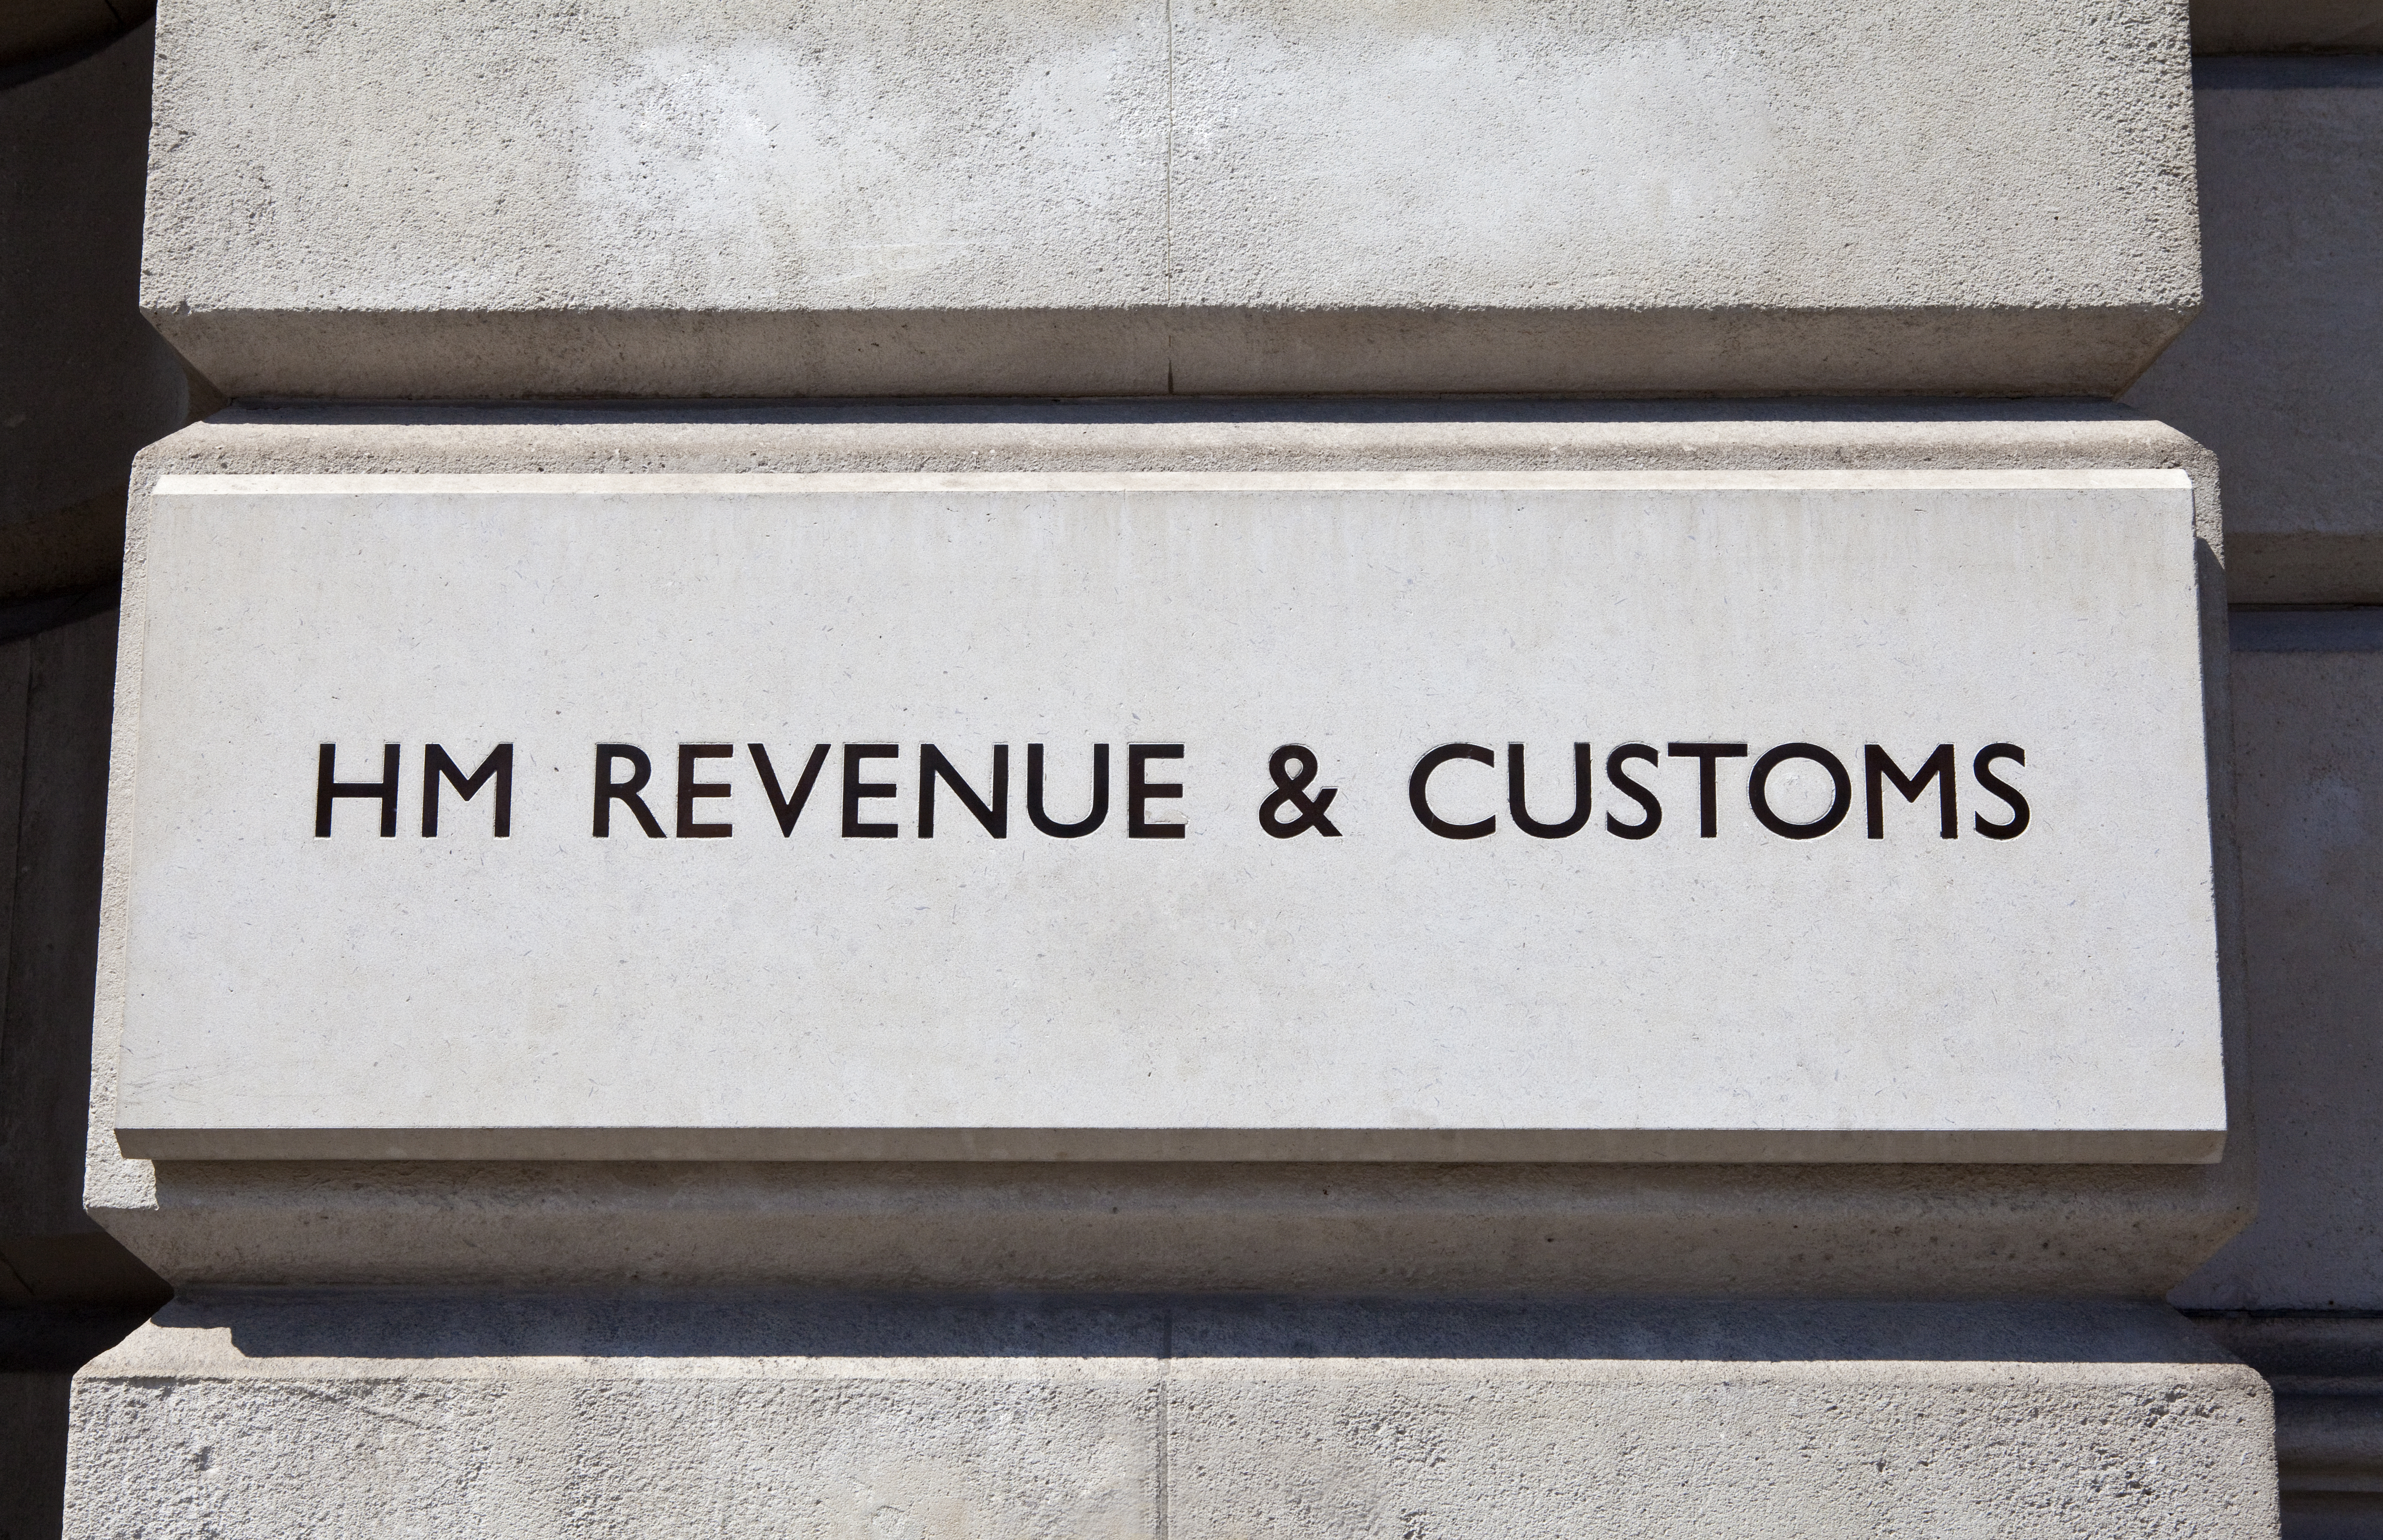 HMRC: Residential transactions up 9% in Q2